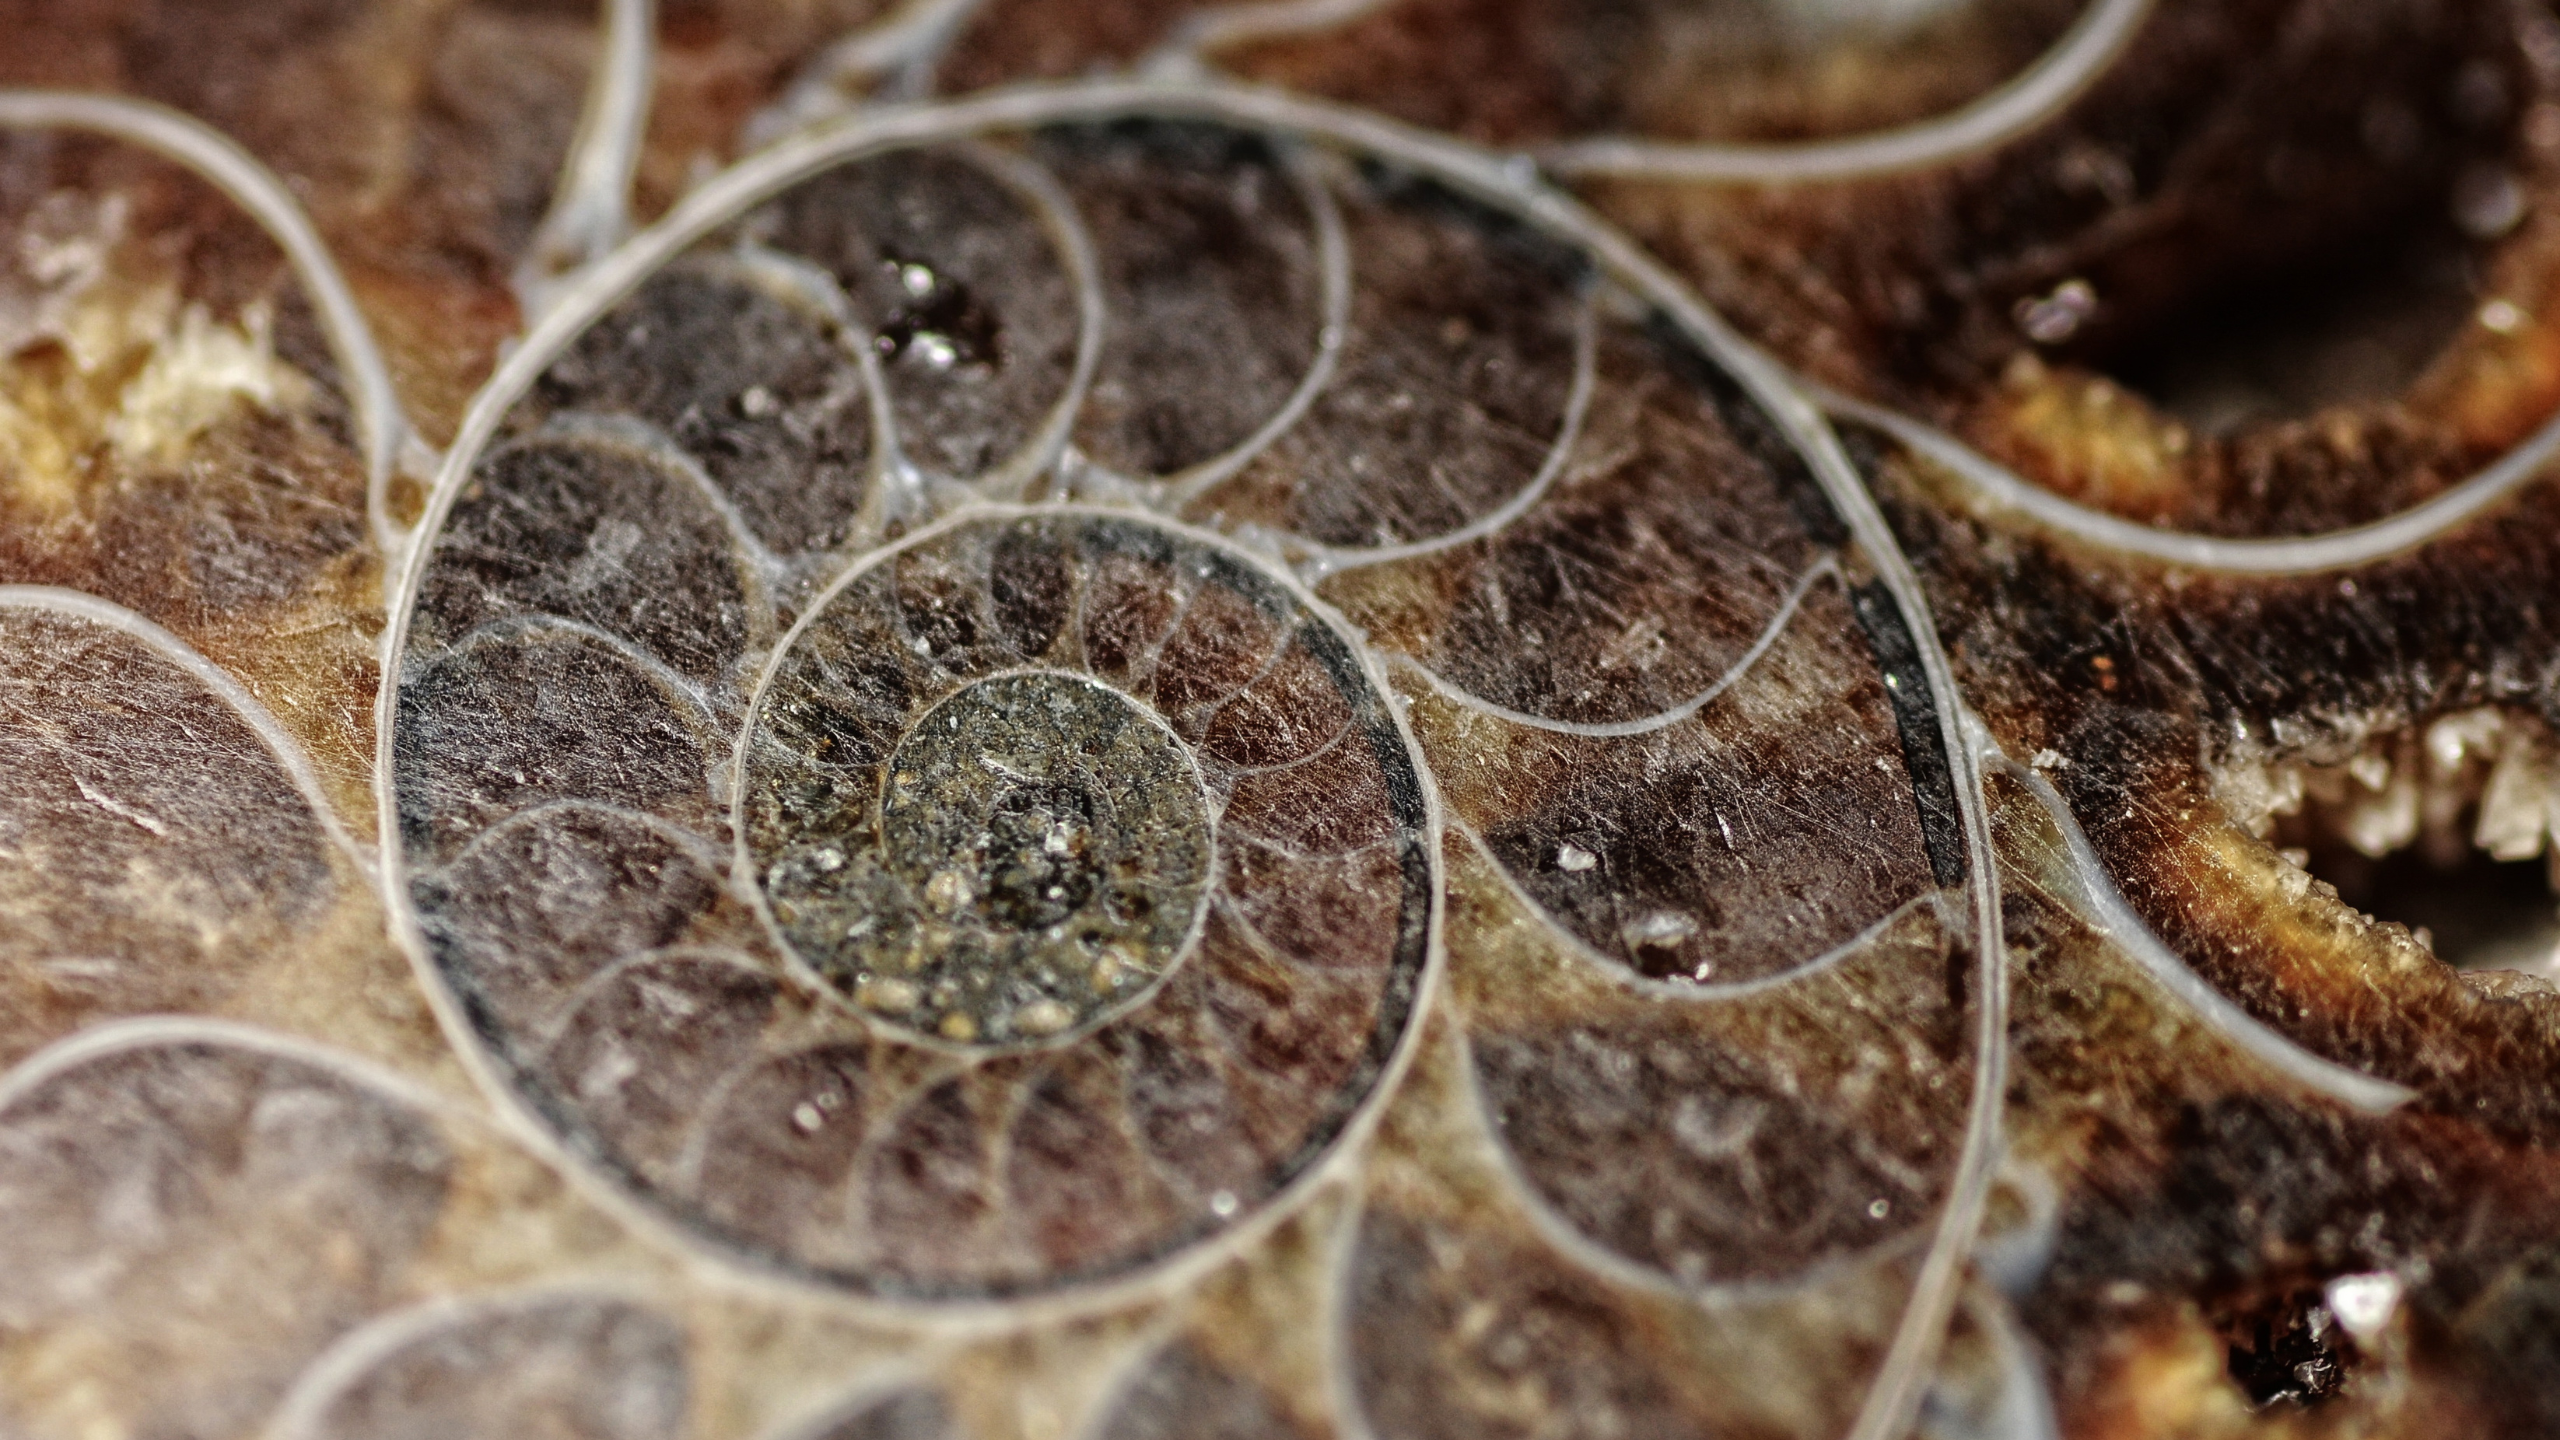 Close up view of a sectional slice of a shell showing circular fractal patterns